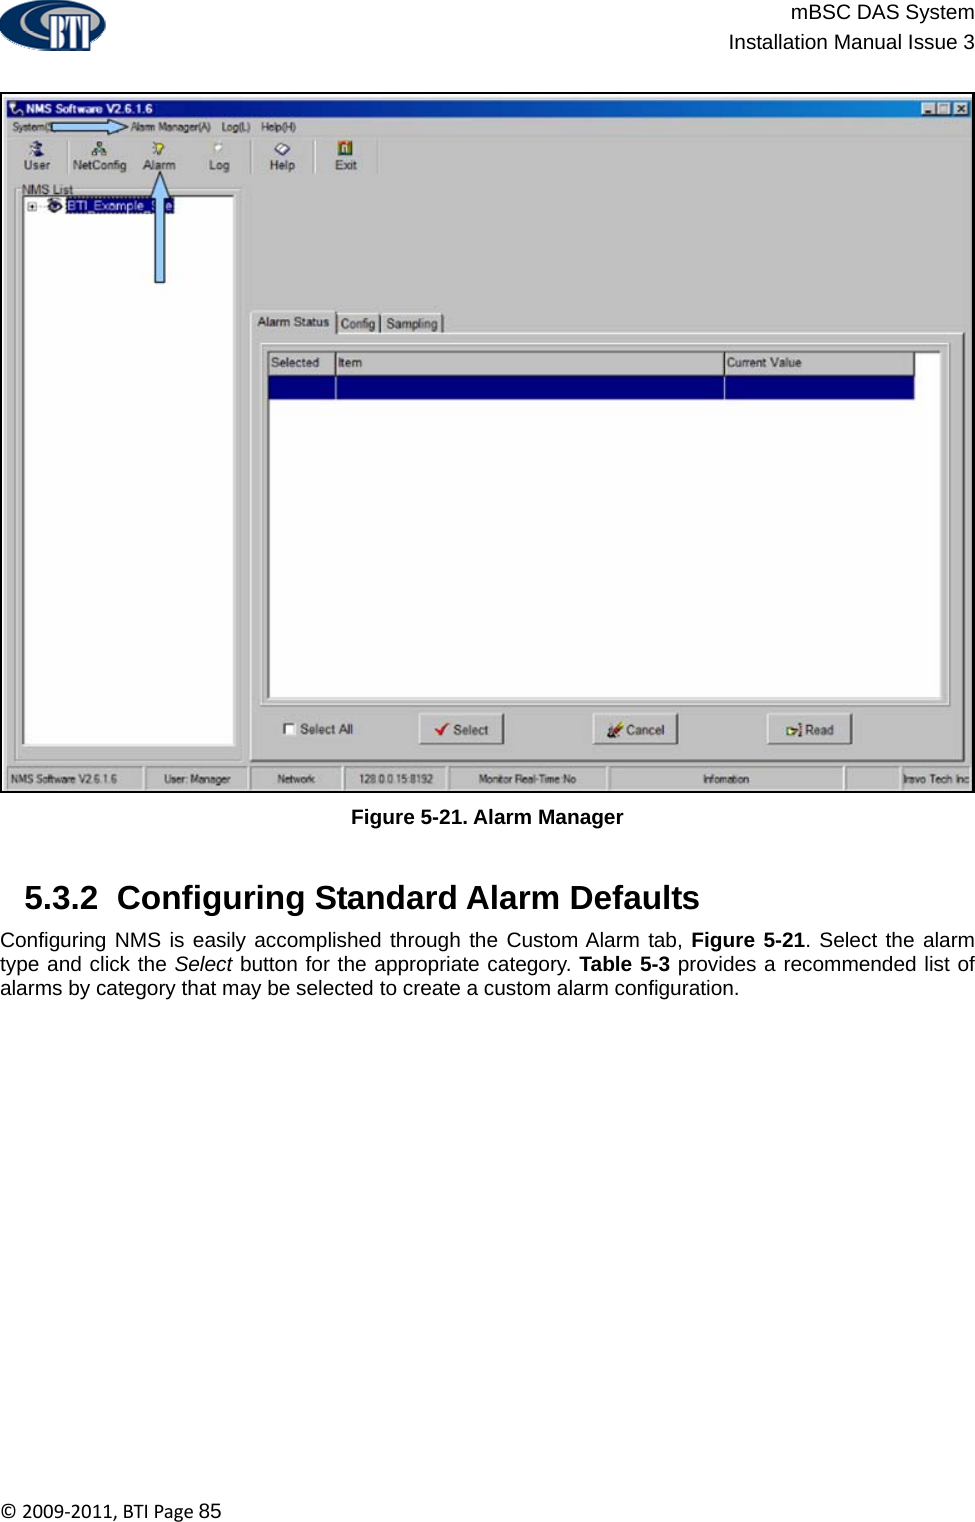                          mBSC DAS System  Installation Manual Issue 3  ©2009‐2011,BTIPage85  Figure 5-21. Alarm Manager   5.3.2  Configuring Standard Alarm Defaults Configuring NMS is easily accomplished through the Custom Alarm tab, Figure 5-21. Select the alarm type and click the Select button for the appropriate category. Table 5-3 provides a recommended list of alarms by category that may be selected to create a custom alarm configuration.  